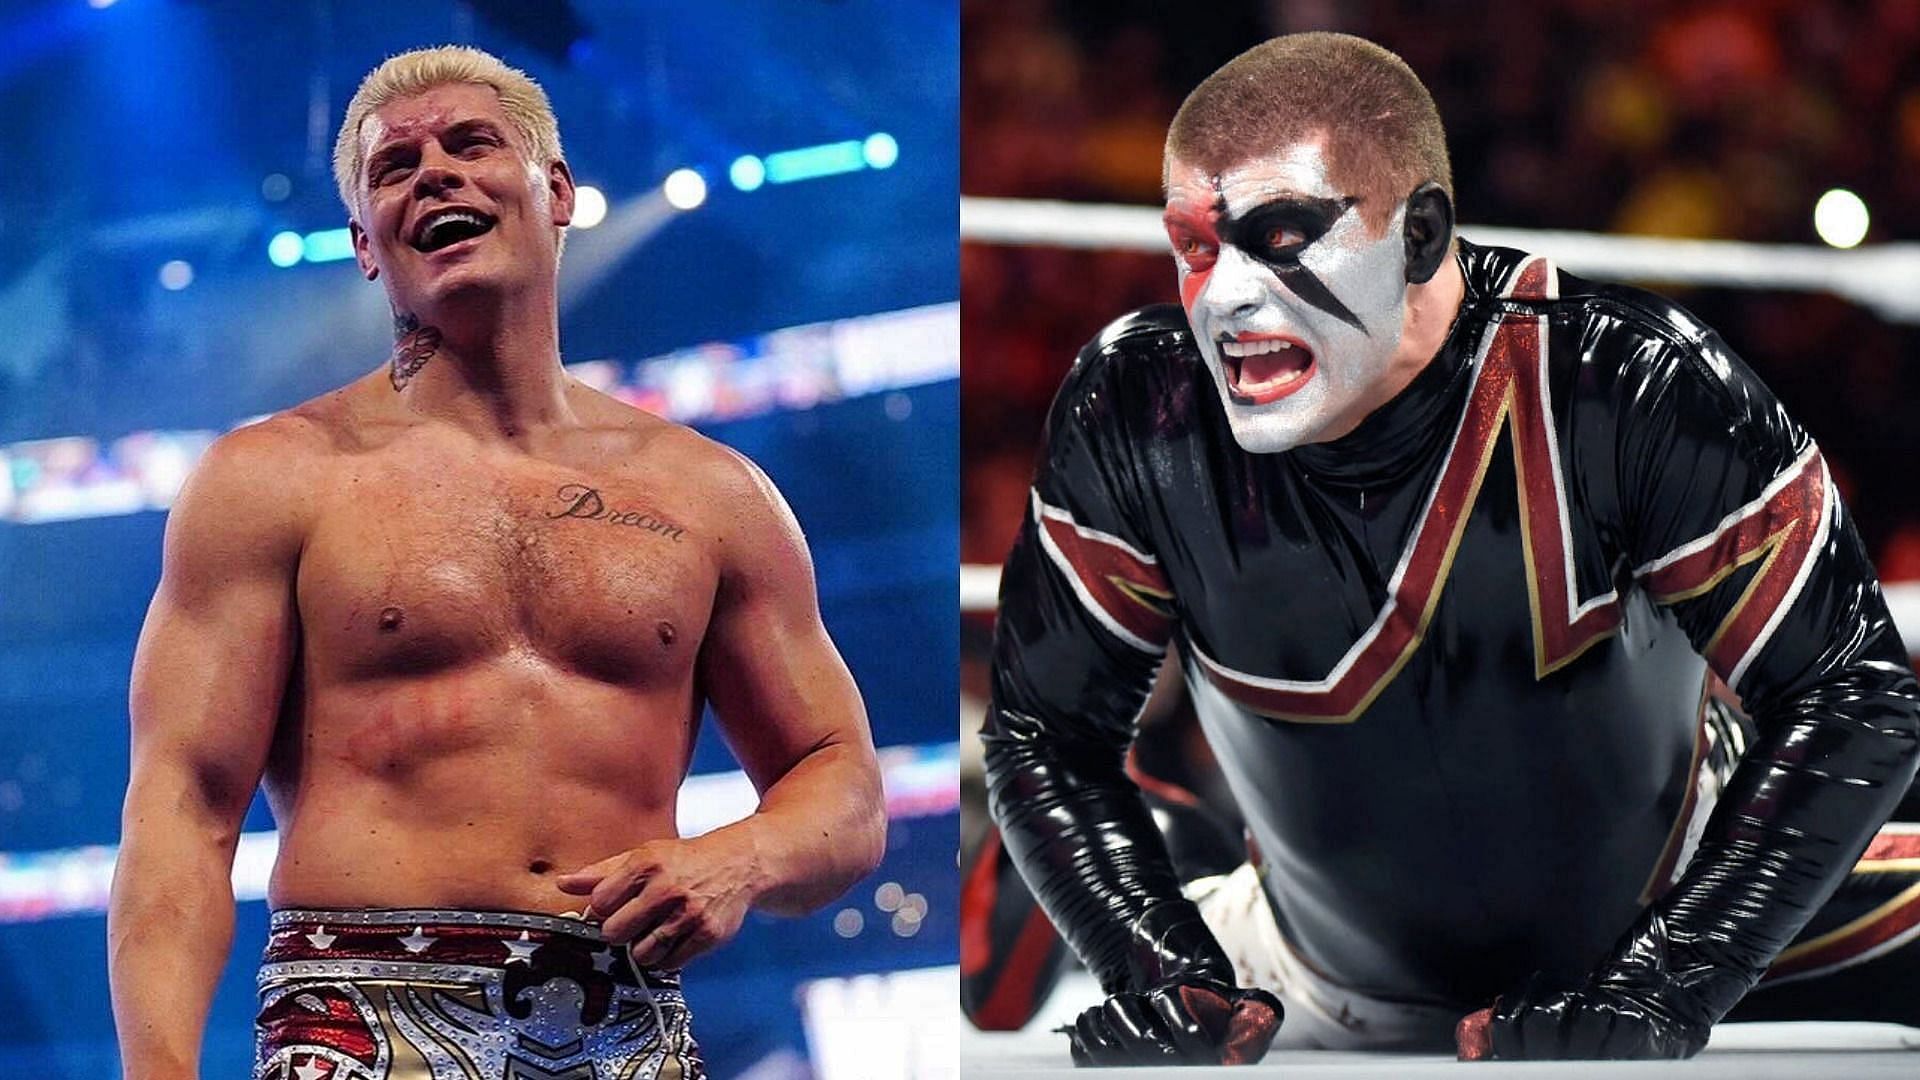 Many WWE superstars have had various gimmicks throughout their career